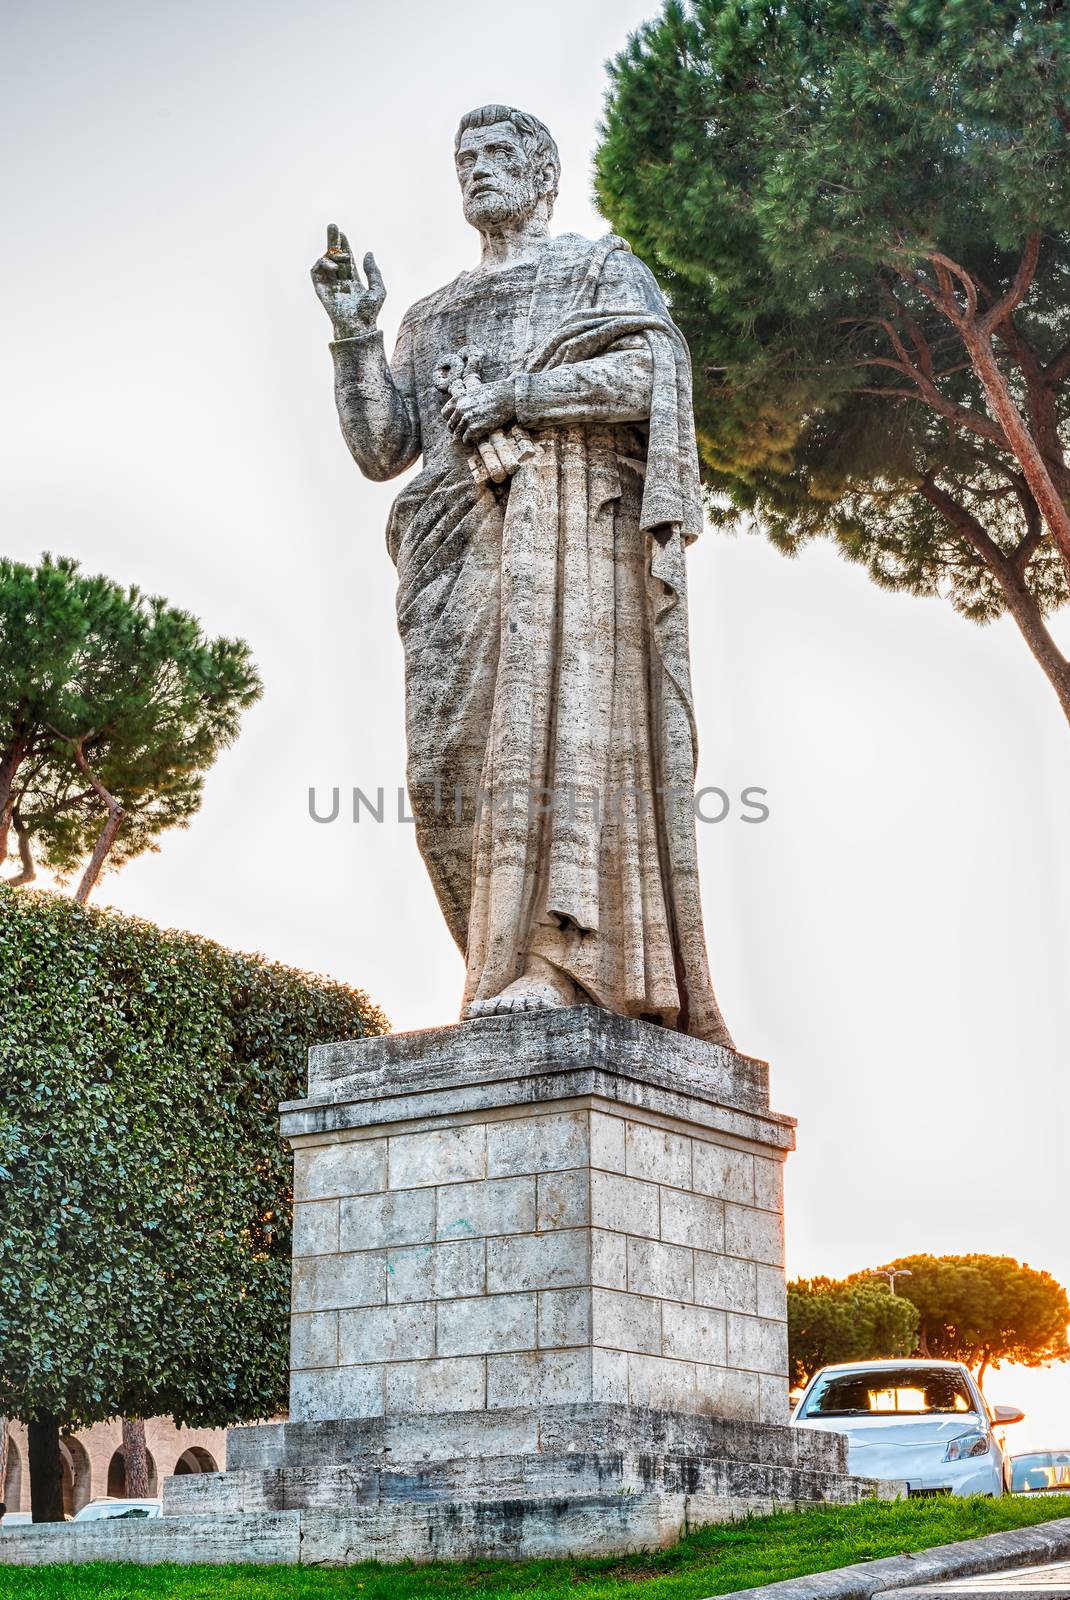 St Peters Monument, EUR district in Rome, Italy by marcorubino